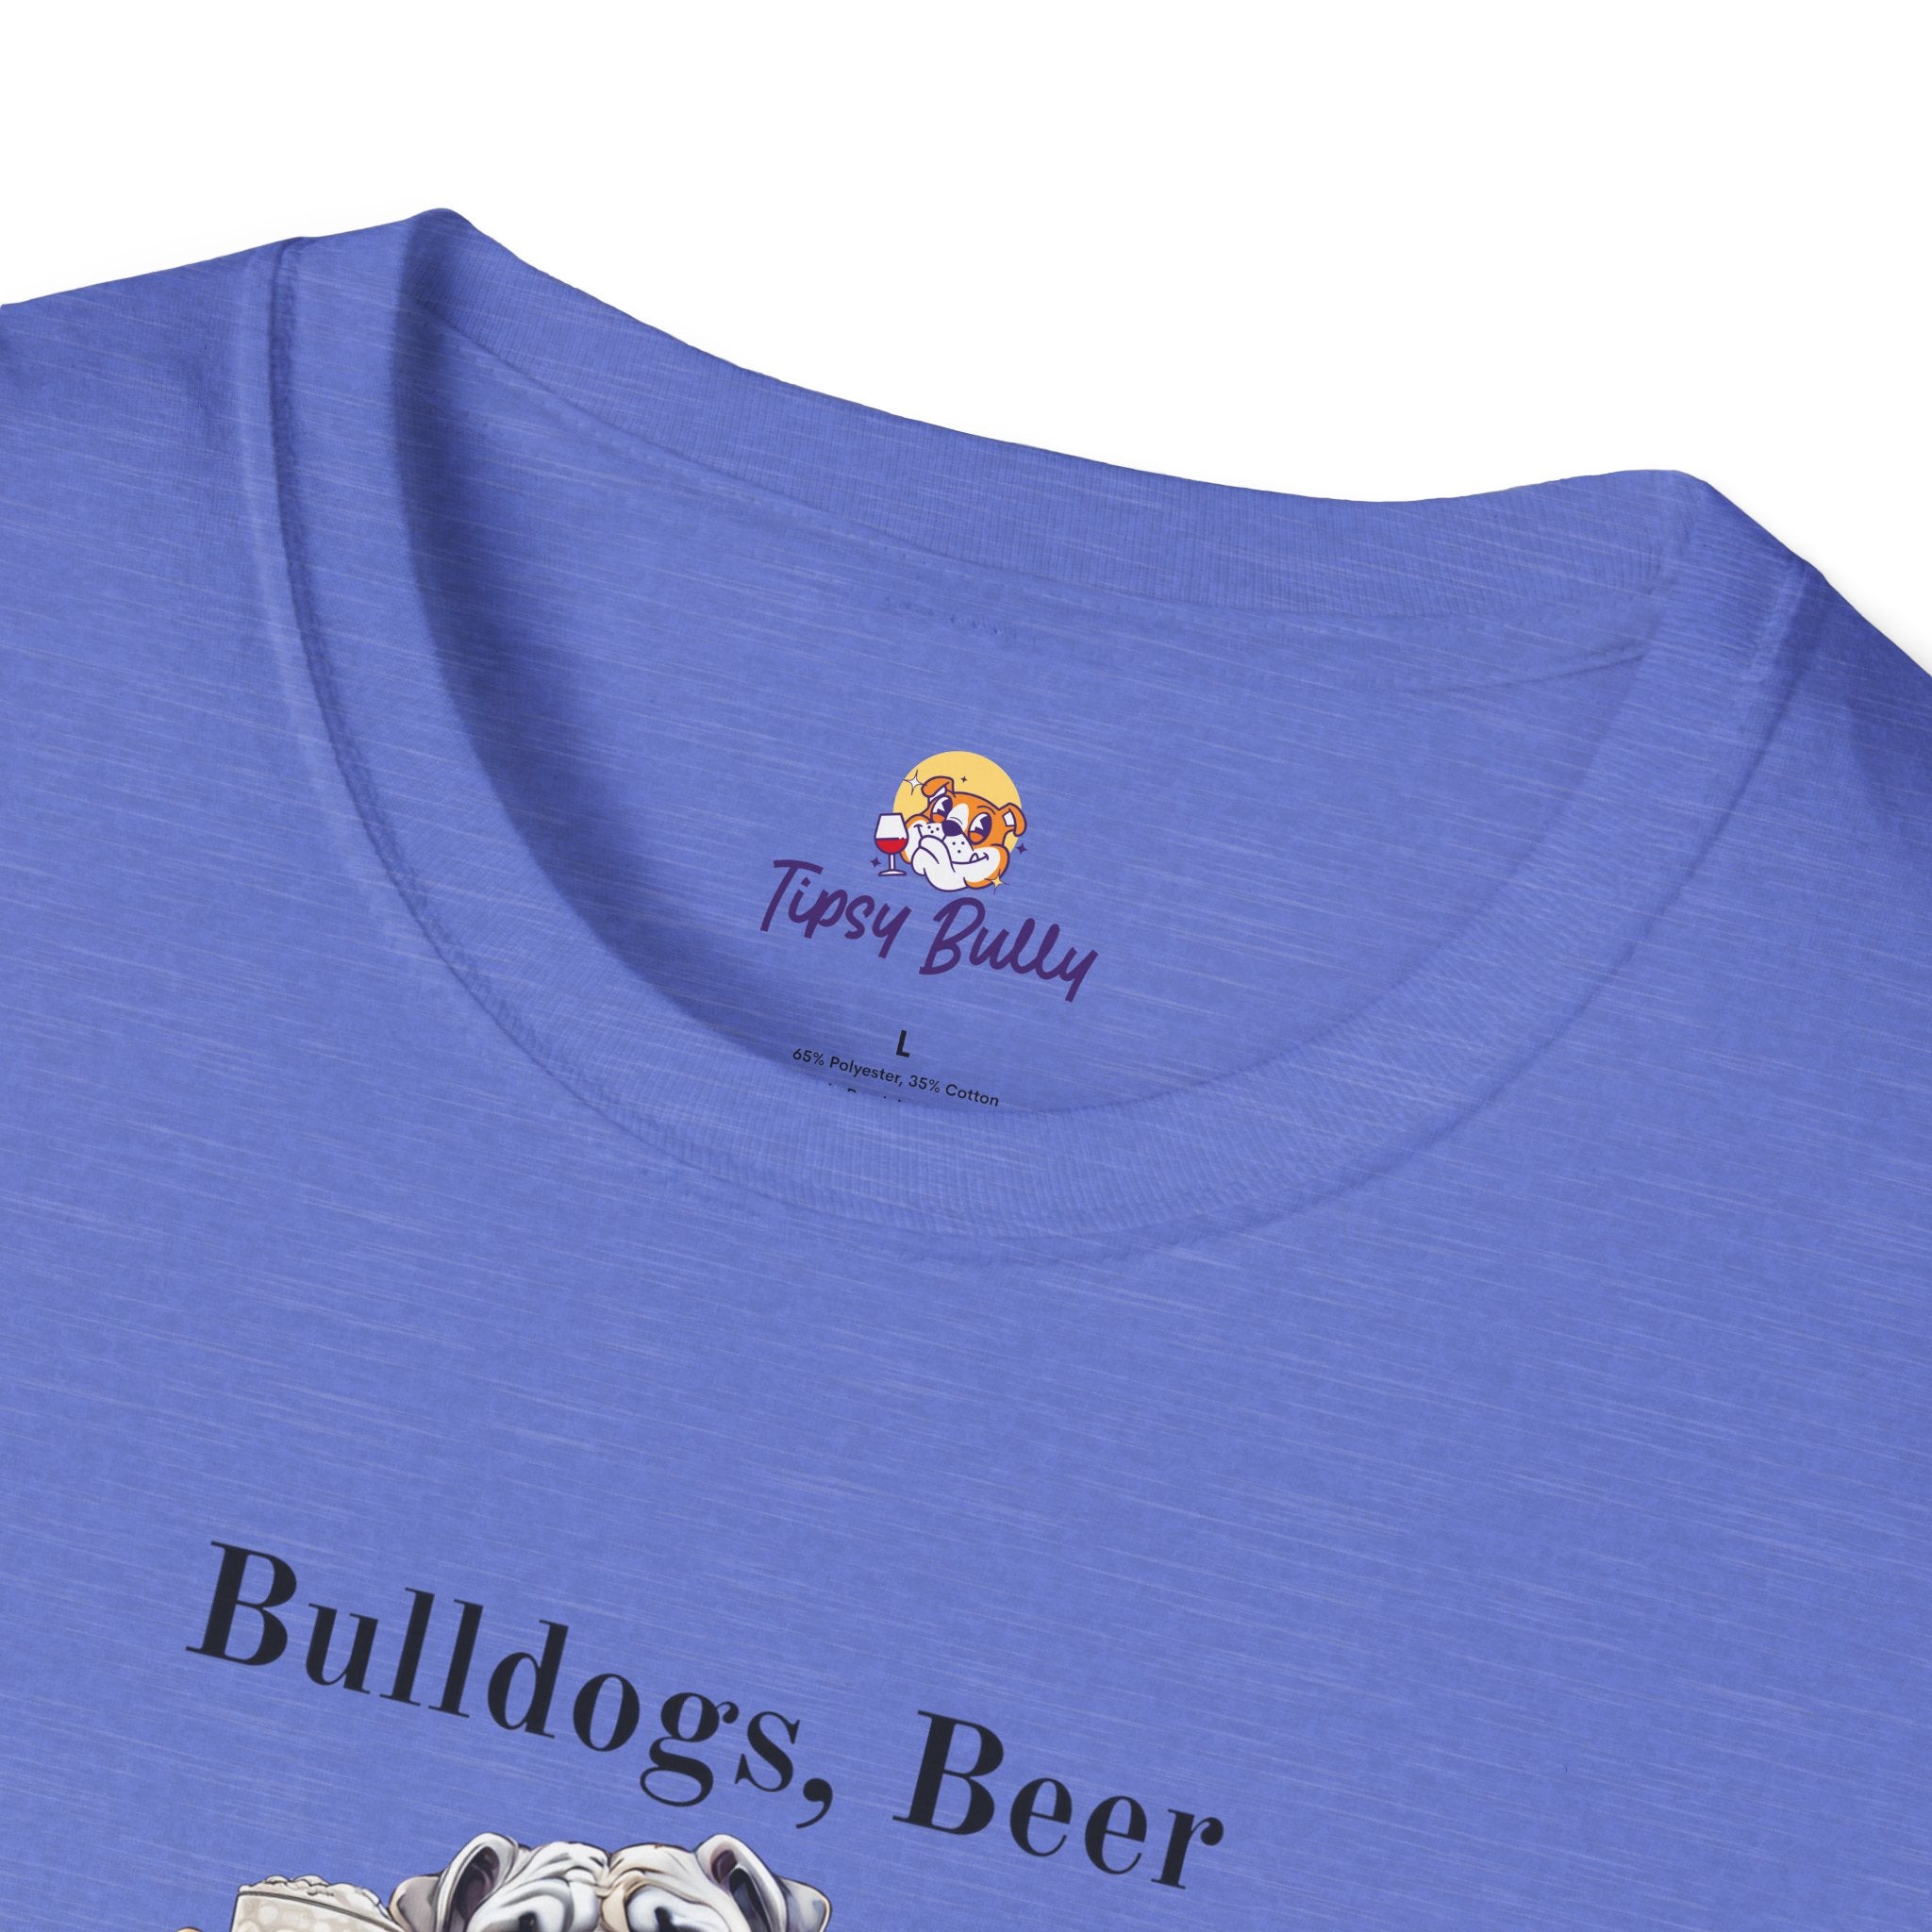 Bulldogs, Beer, and Bad Decisions" Unisex T-Shirt by Tipsy Bully (English/White)